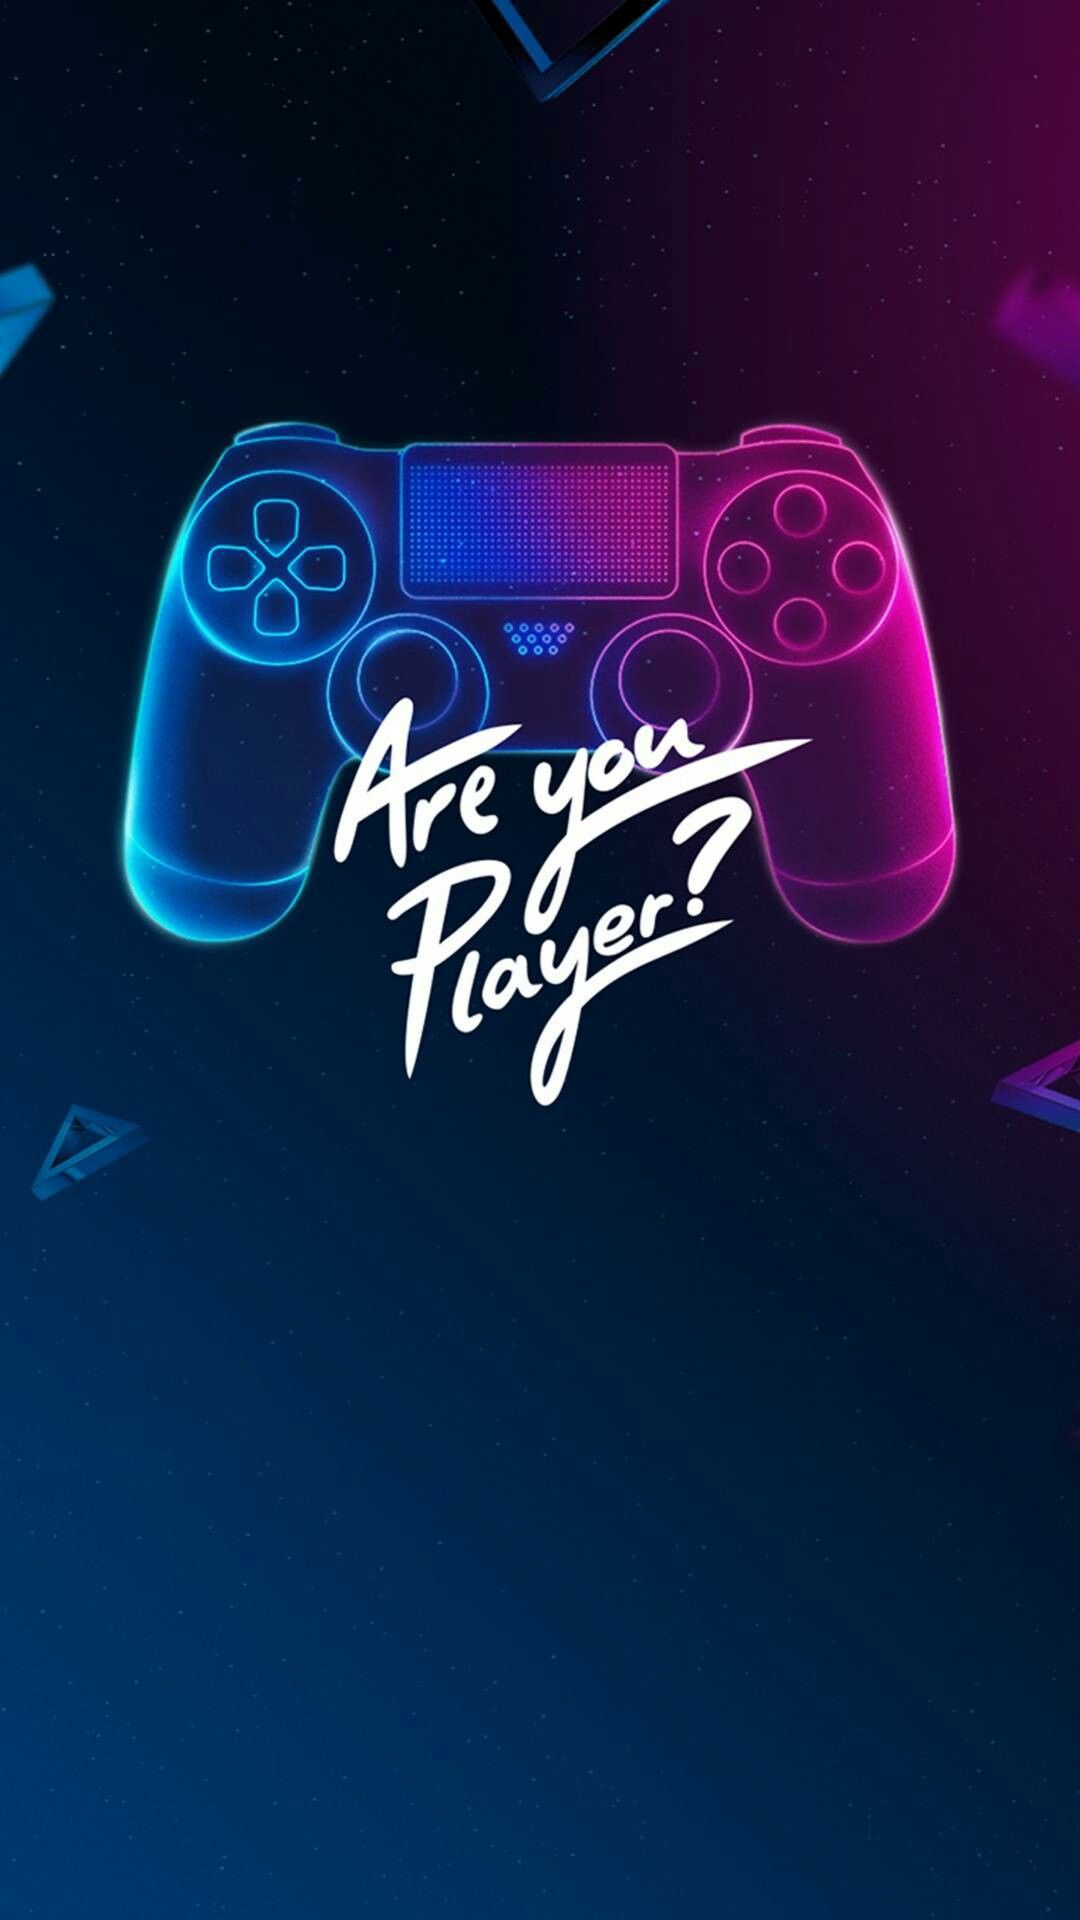 Cool Aesthetic Ps4 Wallpapers Wallpapers